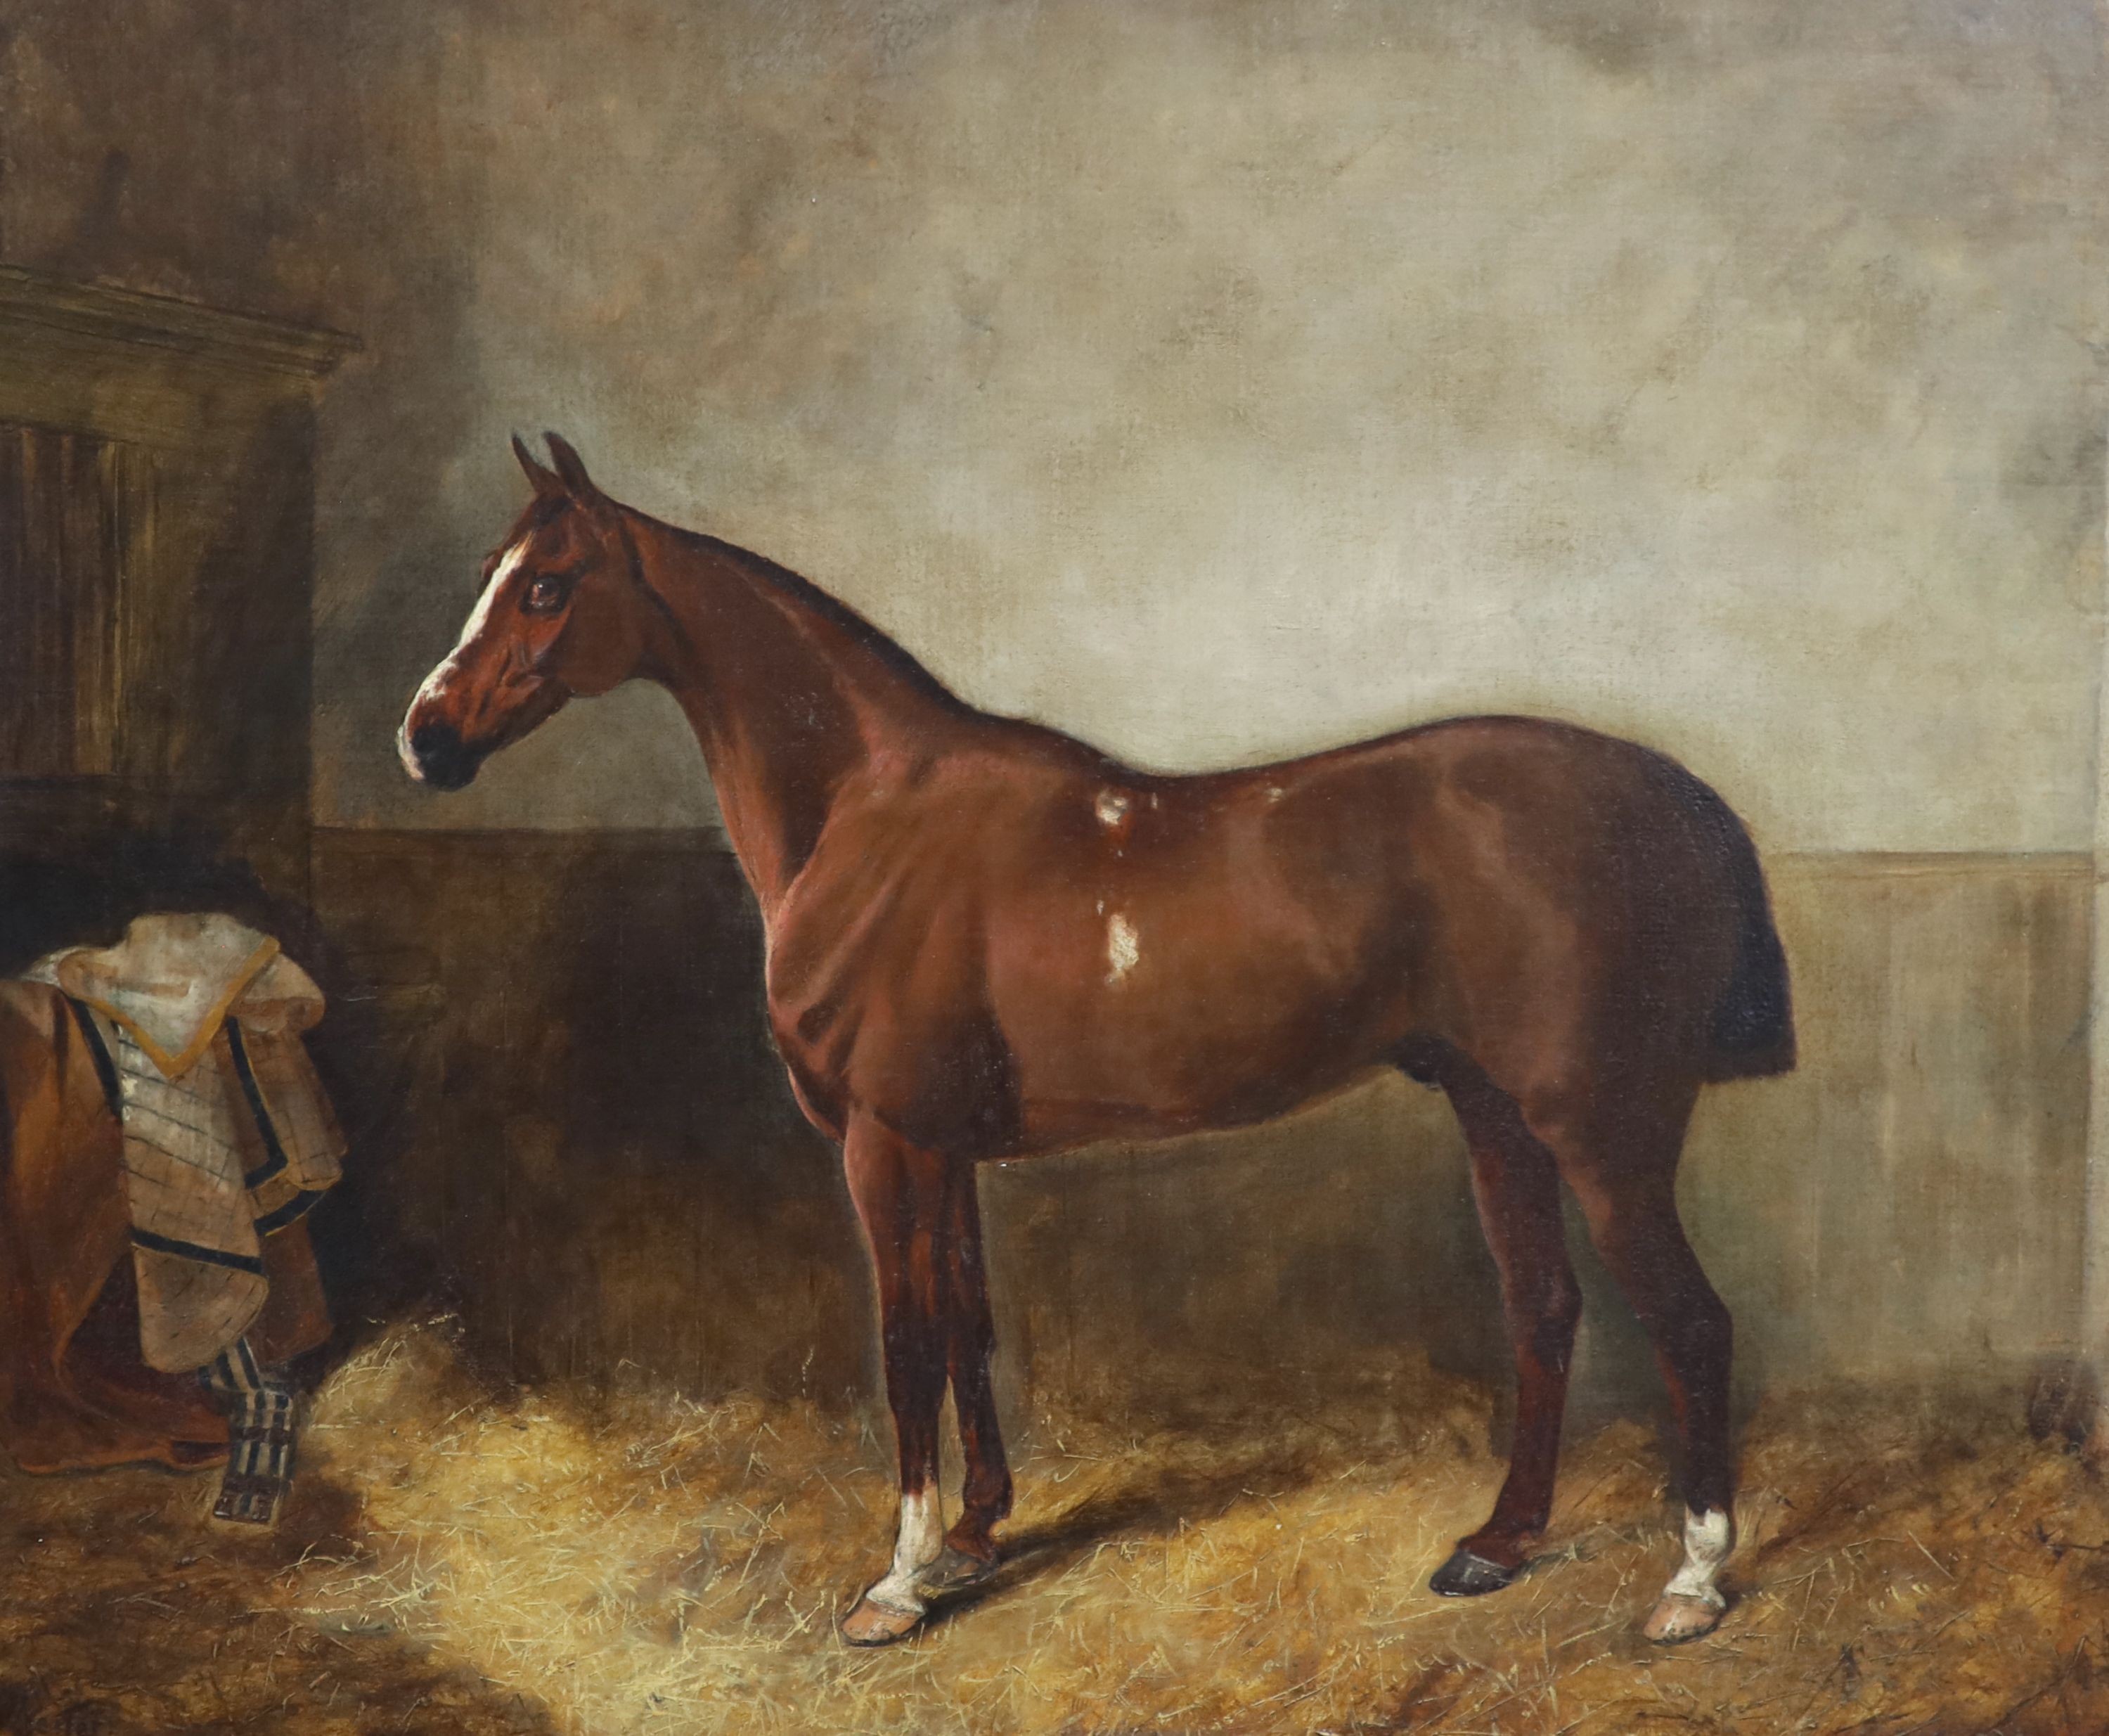 19th century English School, Portrait of a chestnut horse in a stable, Oil on canvas, 62 x 74cm.